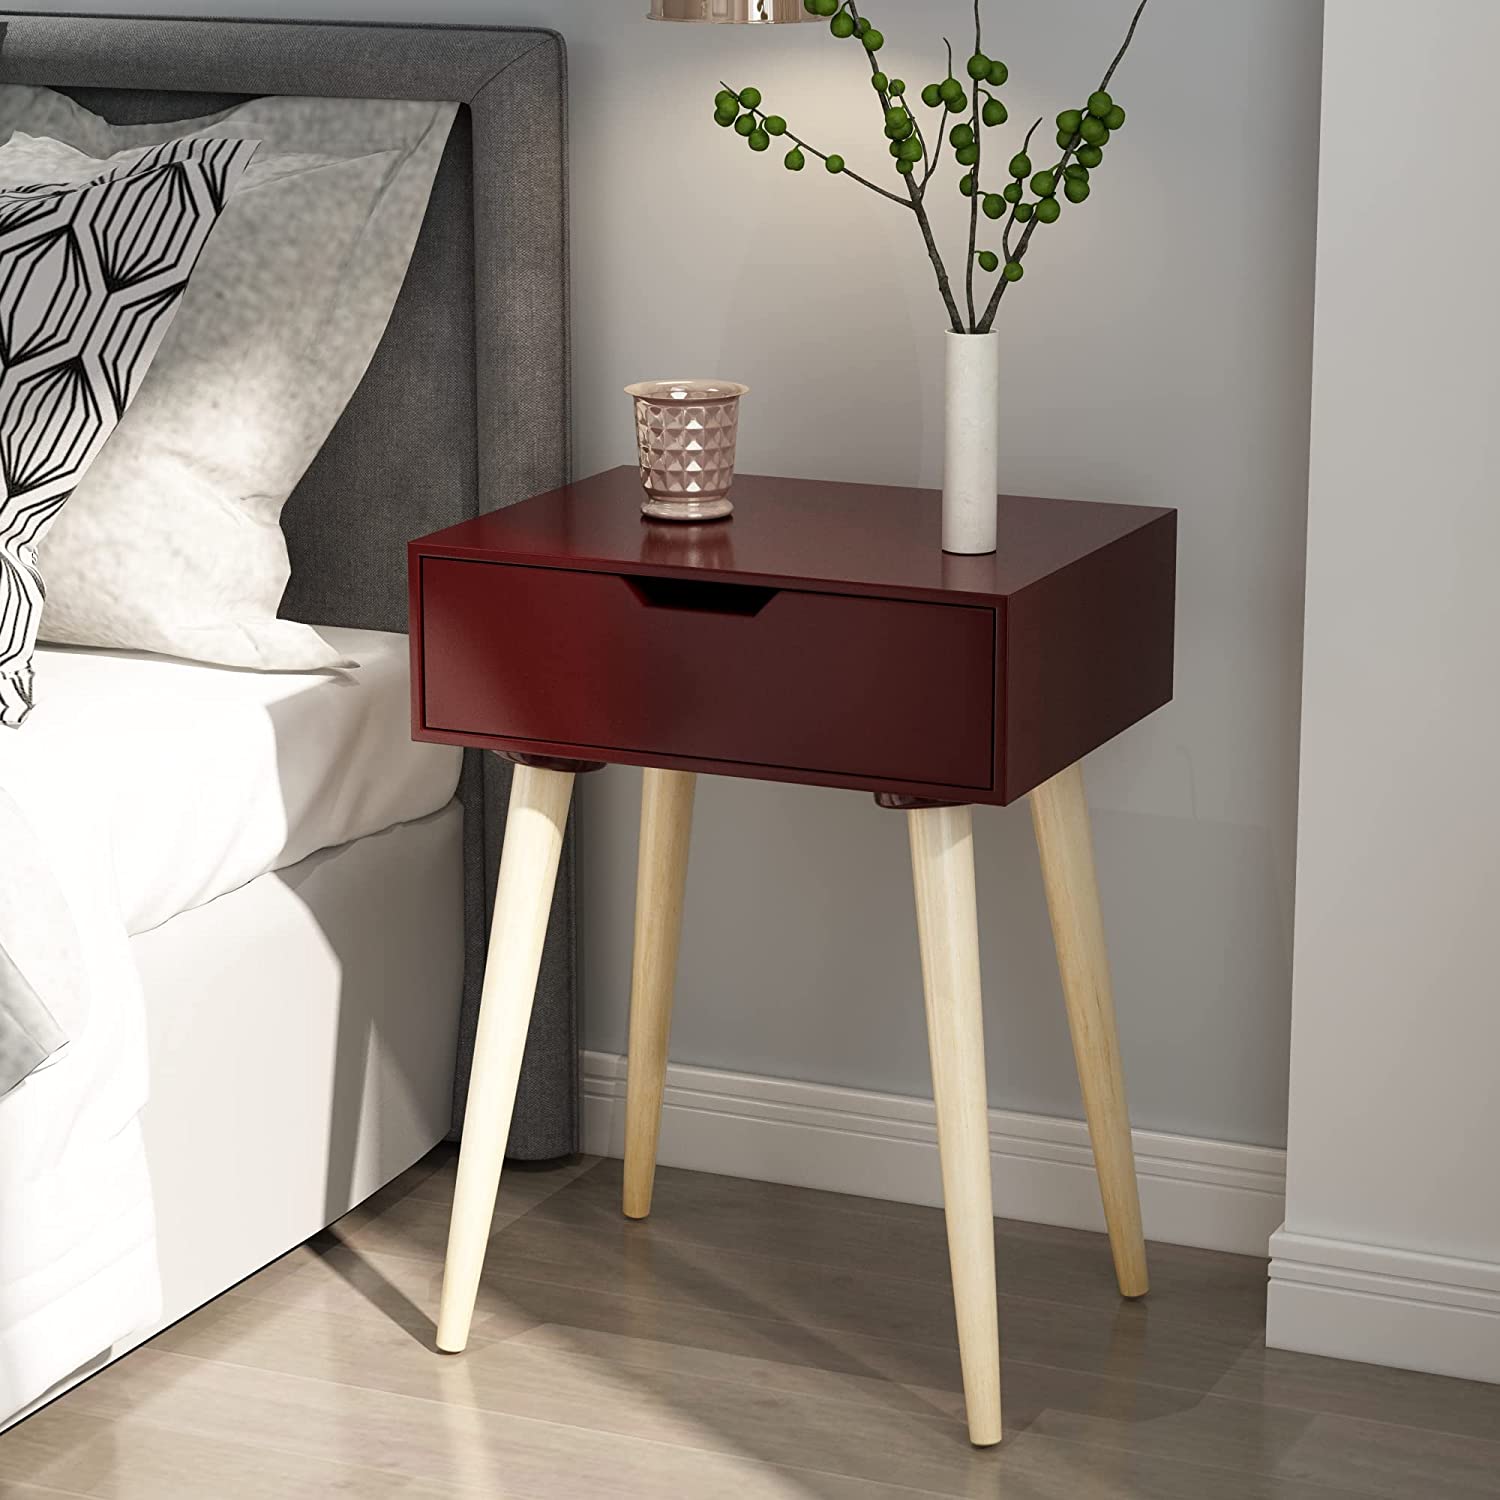 Nightstands End Side Table with Drawer and Solid Wood Legs, Bedside Table for Bedrooms, Mid-Century Modern Drawer Storage Cabinet for Living Room Furniture